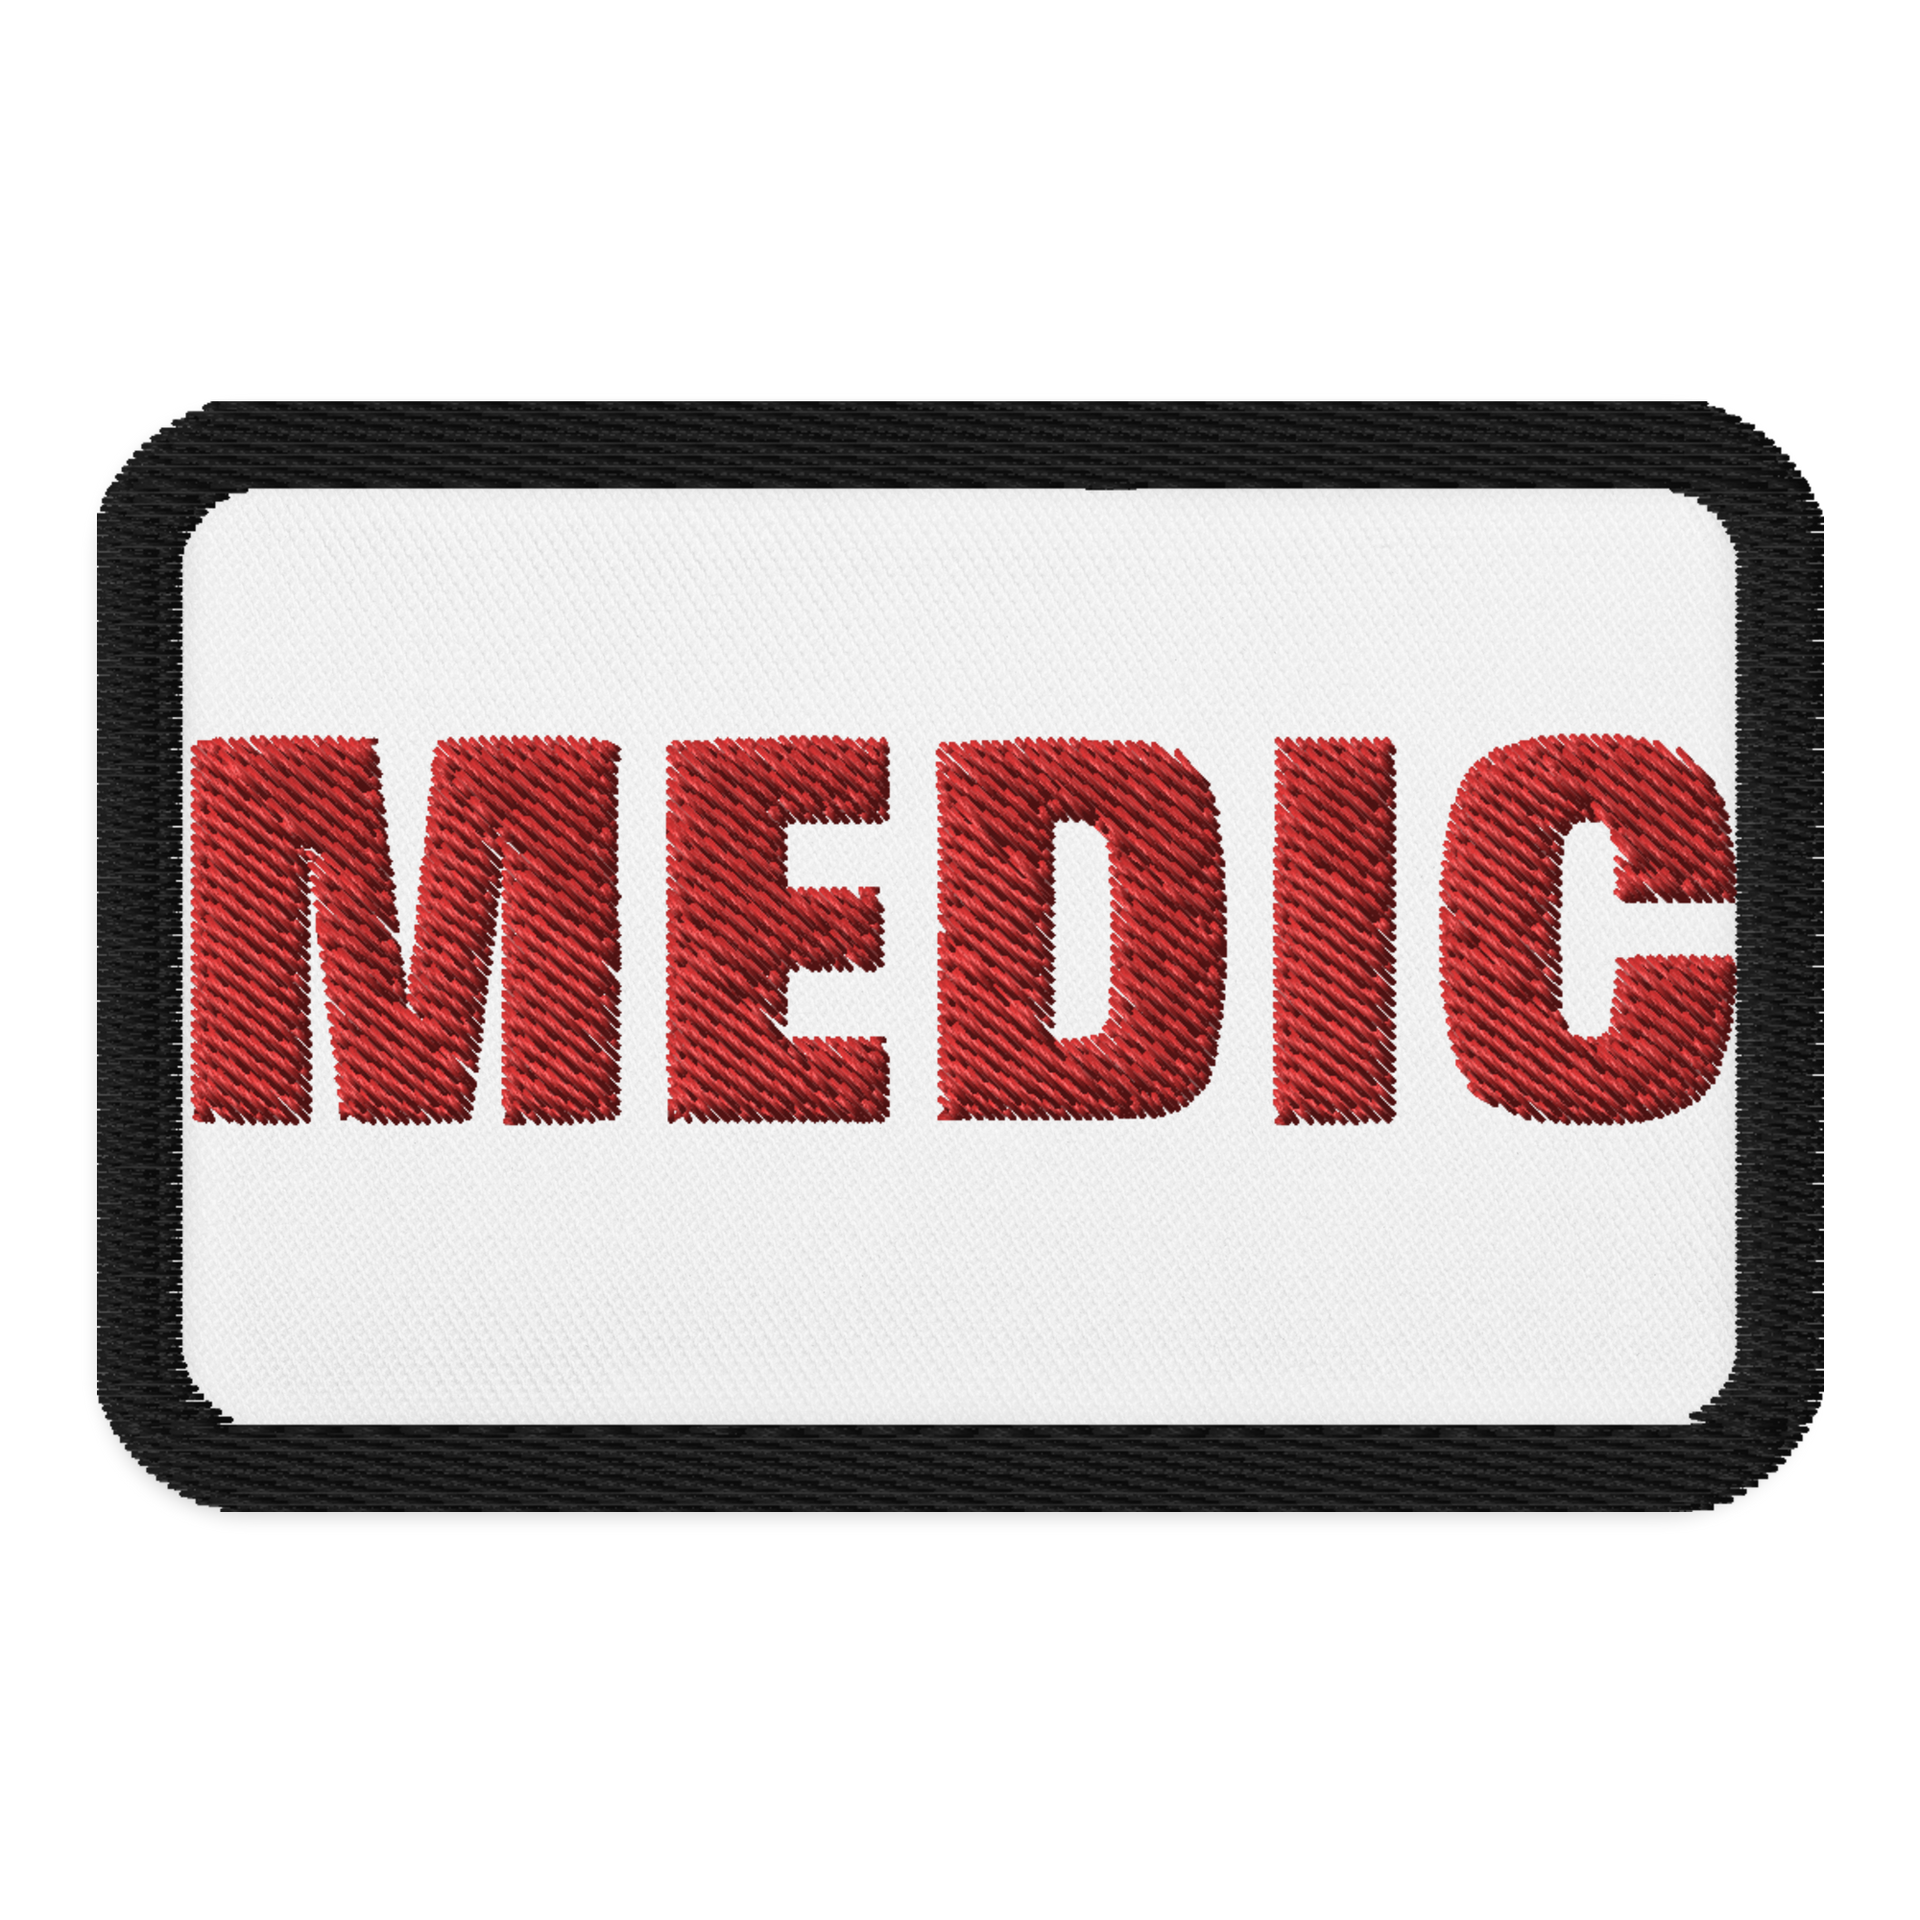 Medical Patches: I Need A Medic Bag! – Red Pawn Shop